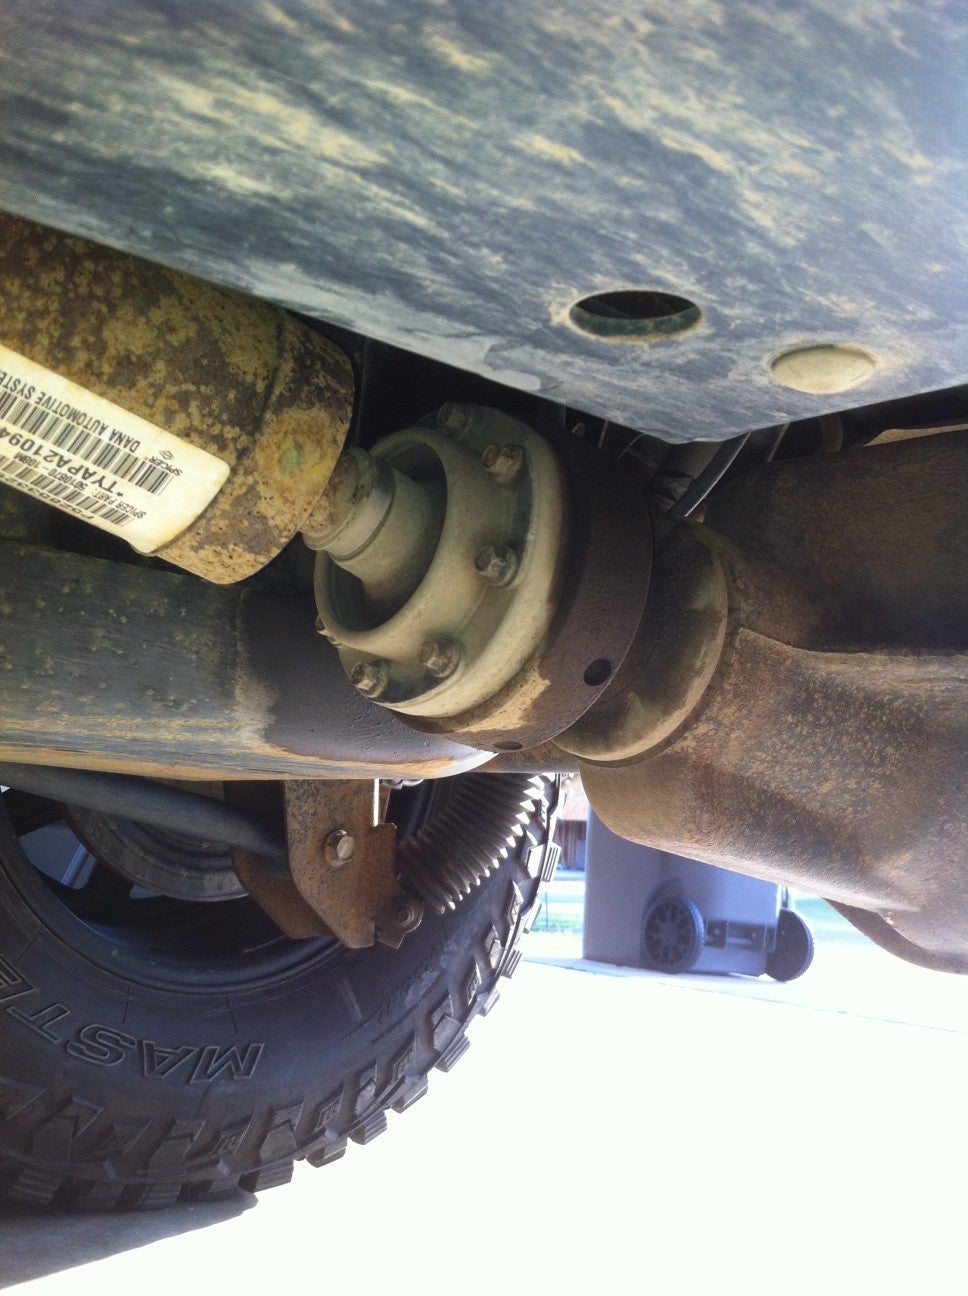 Rear Drive Shaft or Rear Diff issue? | JKOwners Forum